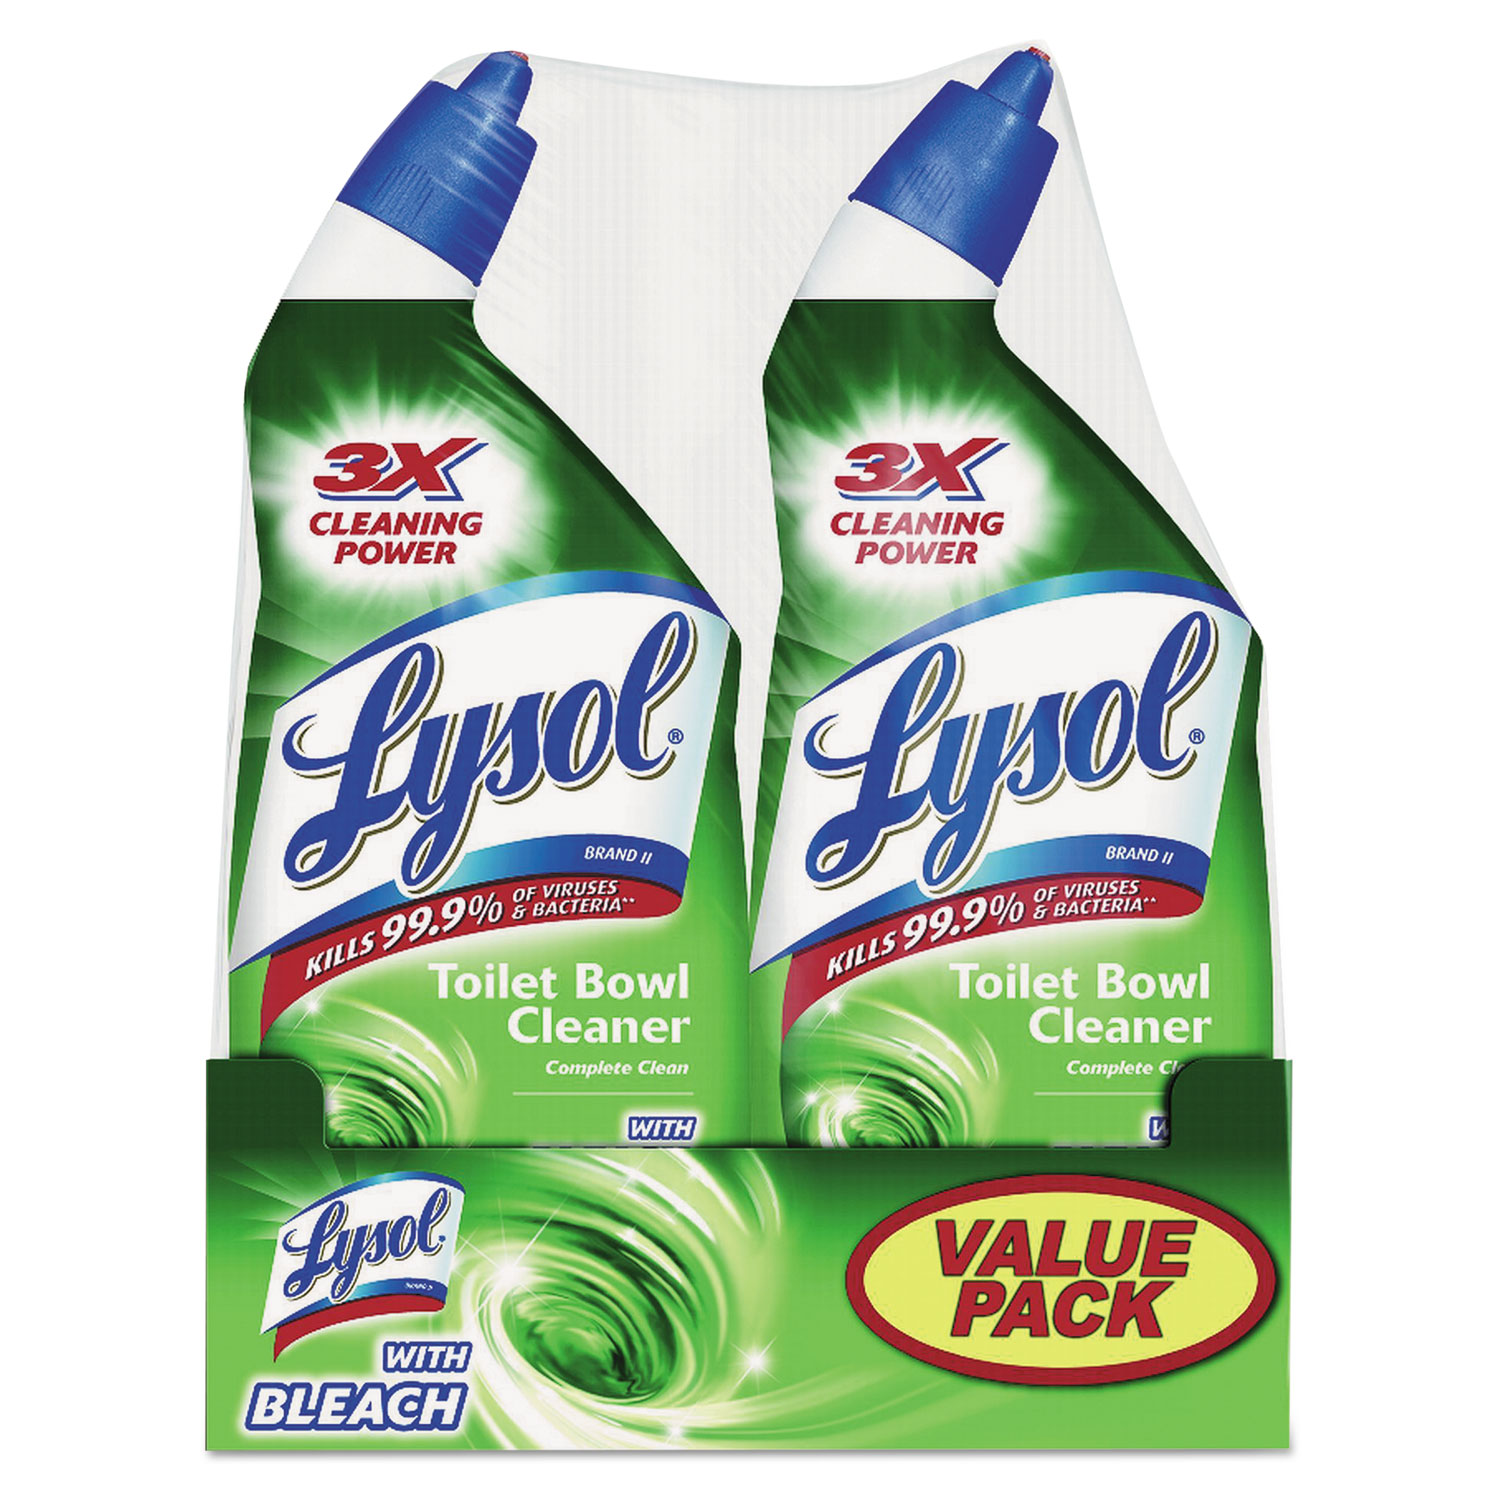 LYSOL Brand Disinfectant Toilet Bowl Cleaner with Bleach Liquid 24oz Twin Pack